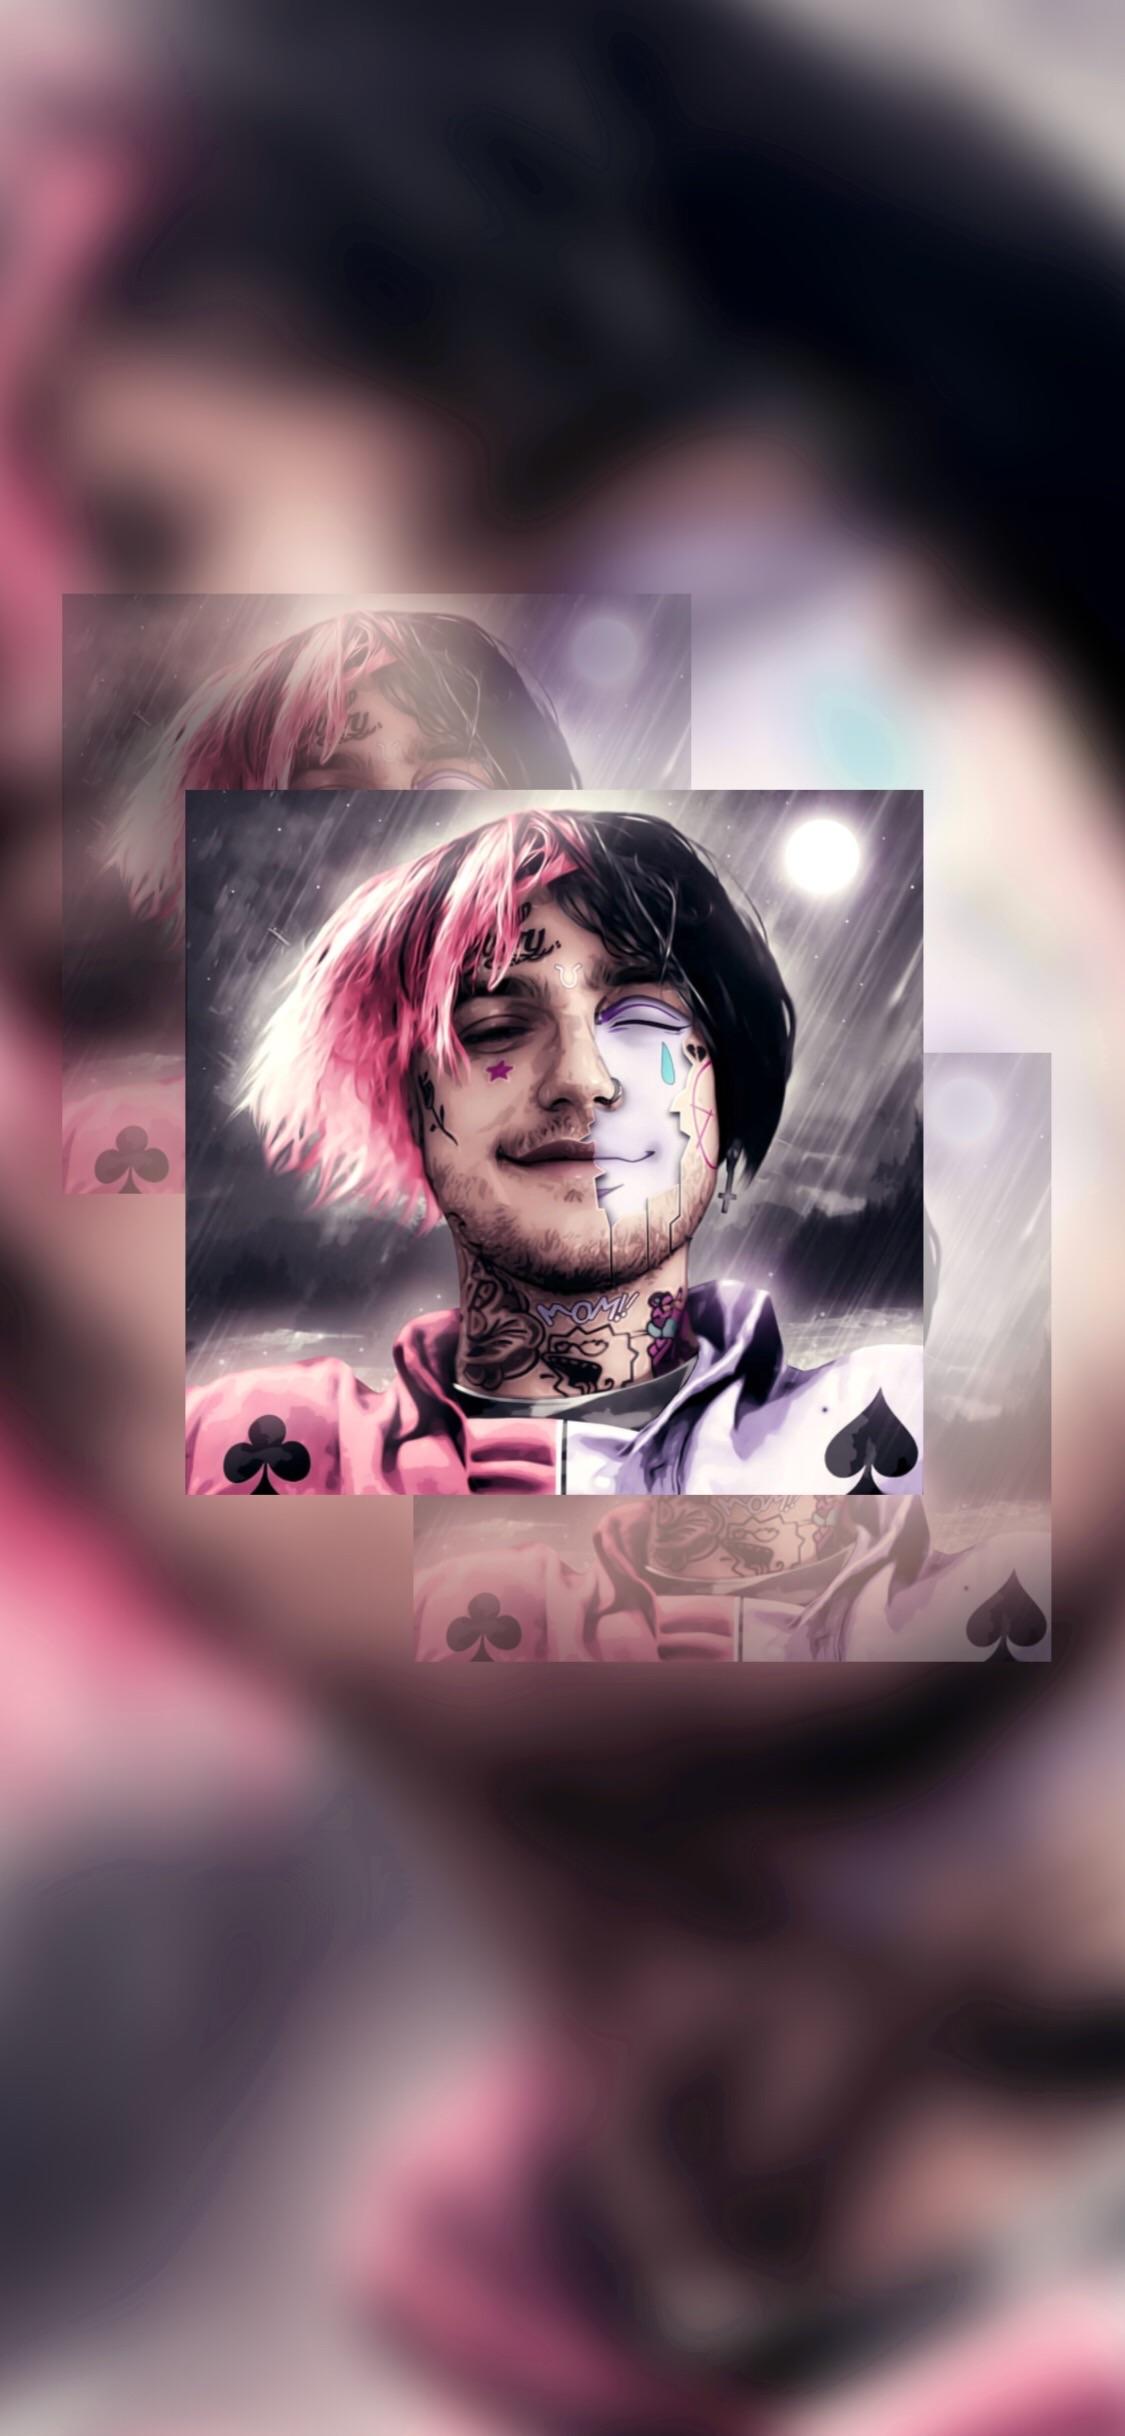 Gothboiclique - Lil Peep And X , HD Wallpaper & Backgrounds